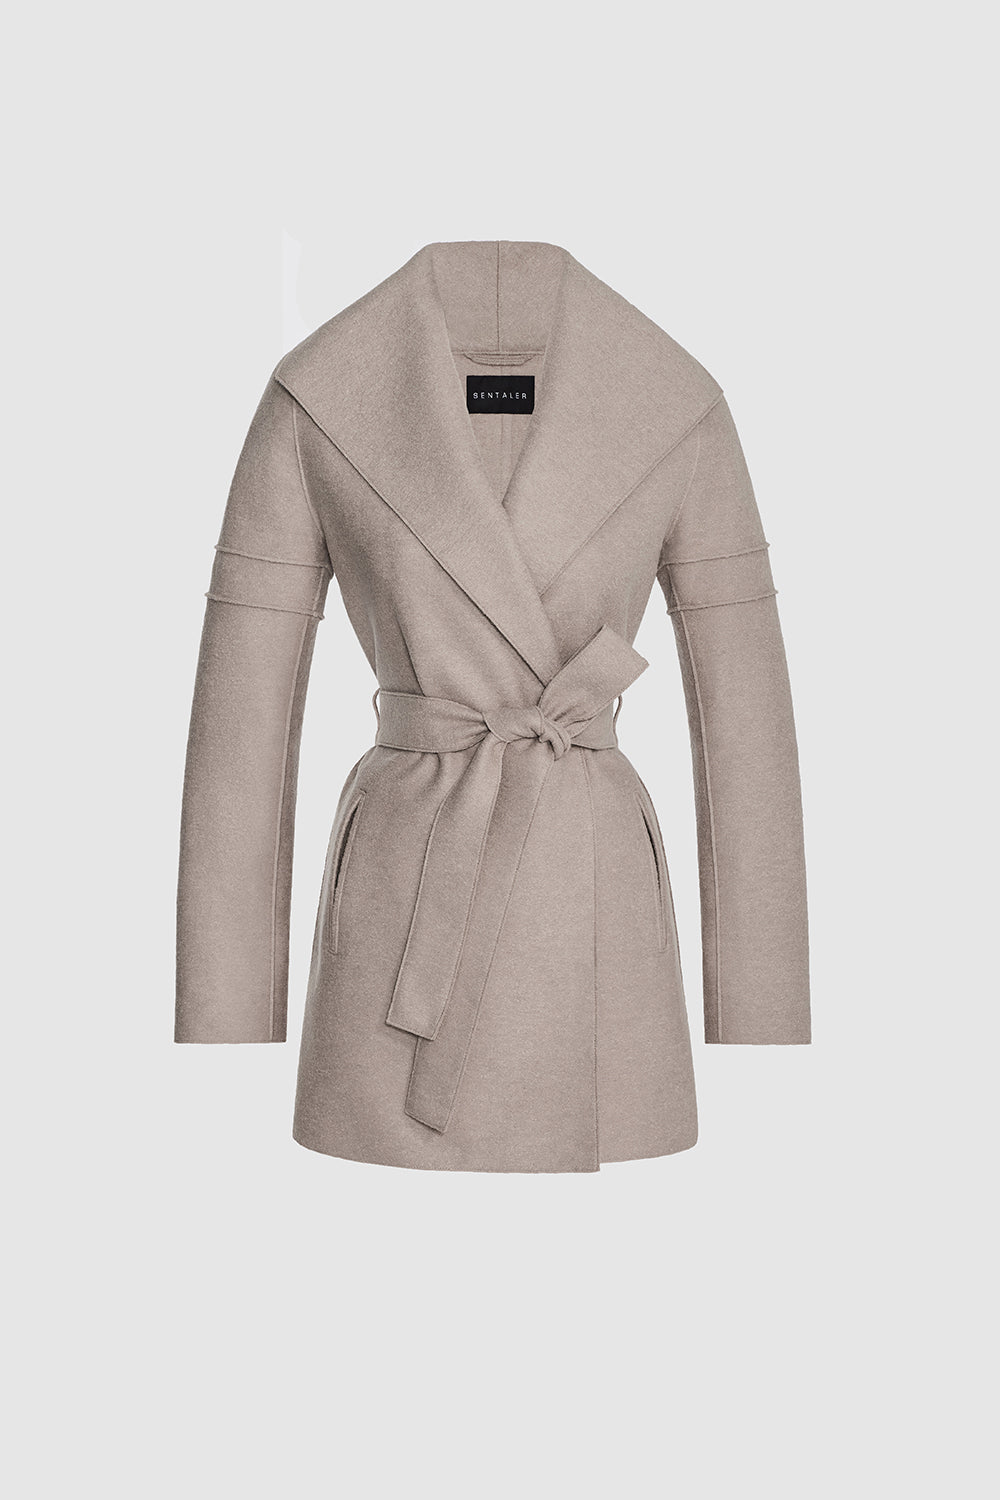 Signature Double Face Hooded Wrap Coat - Women - Ready-to-Wear